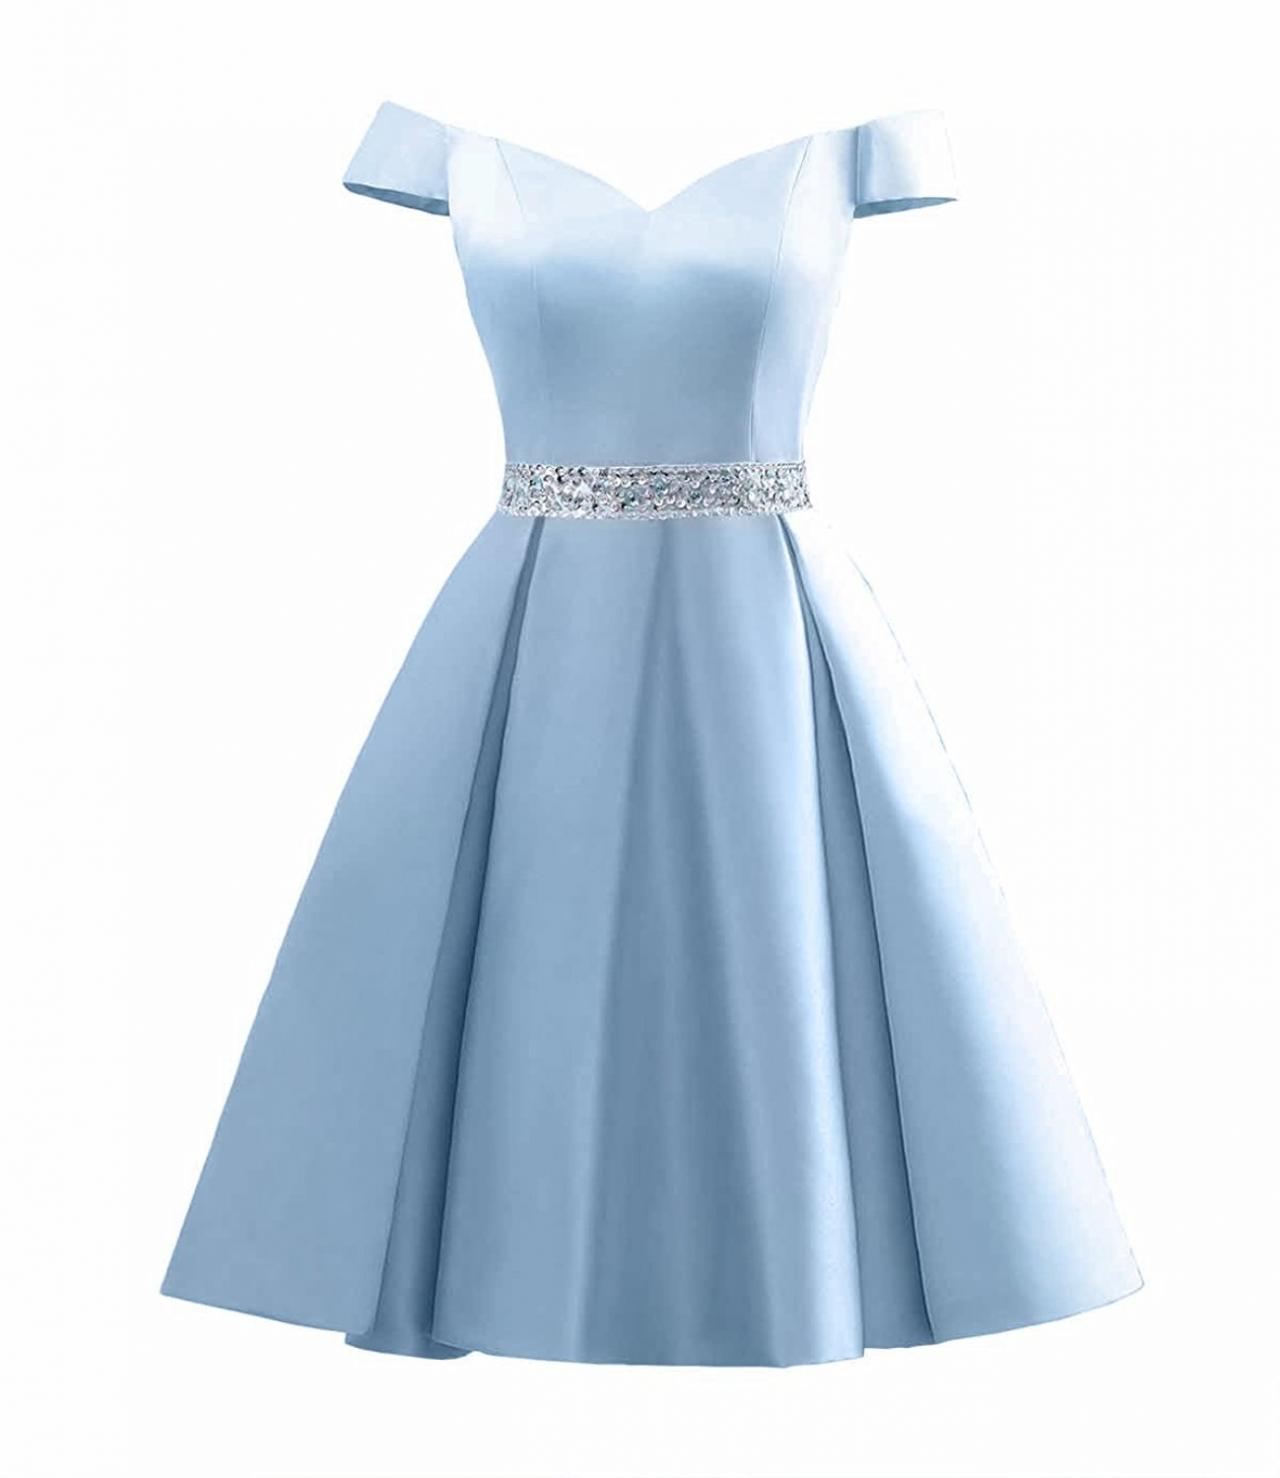 Cheapp Sky Blue Satin Beaded Short Homecoming Dress Above Length Mini Prom Party Gowns ,custom Made Cocktail Gowns Short With Beaded